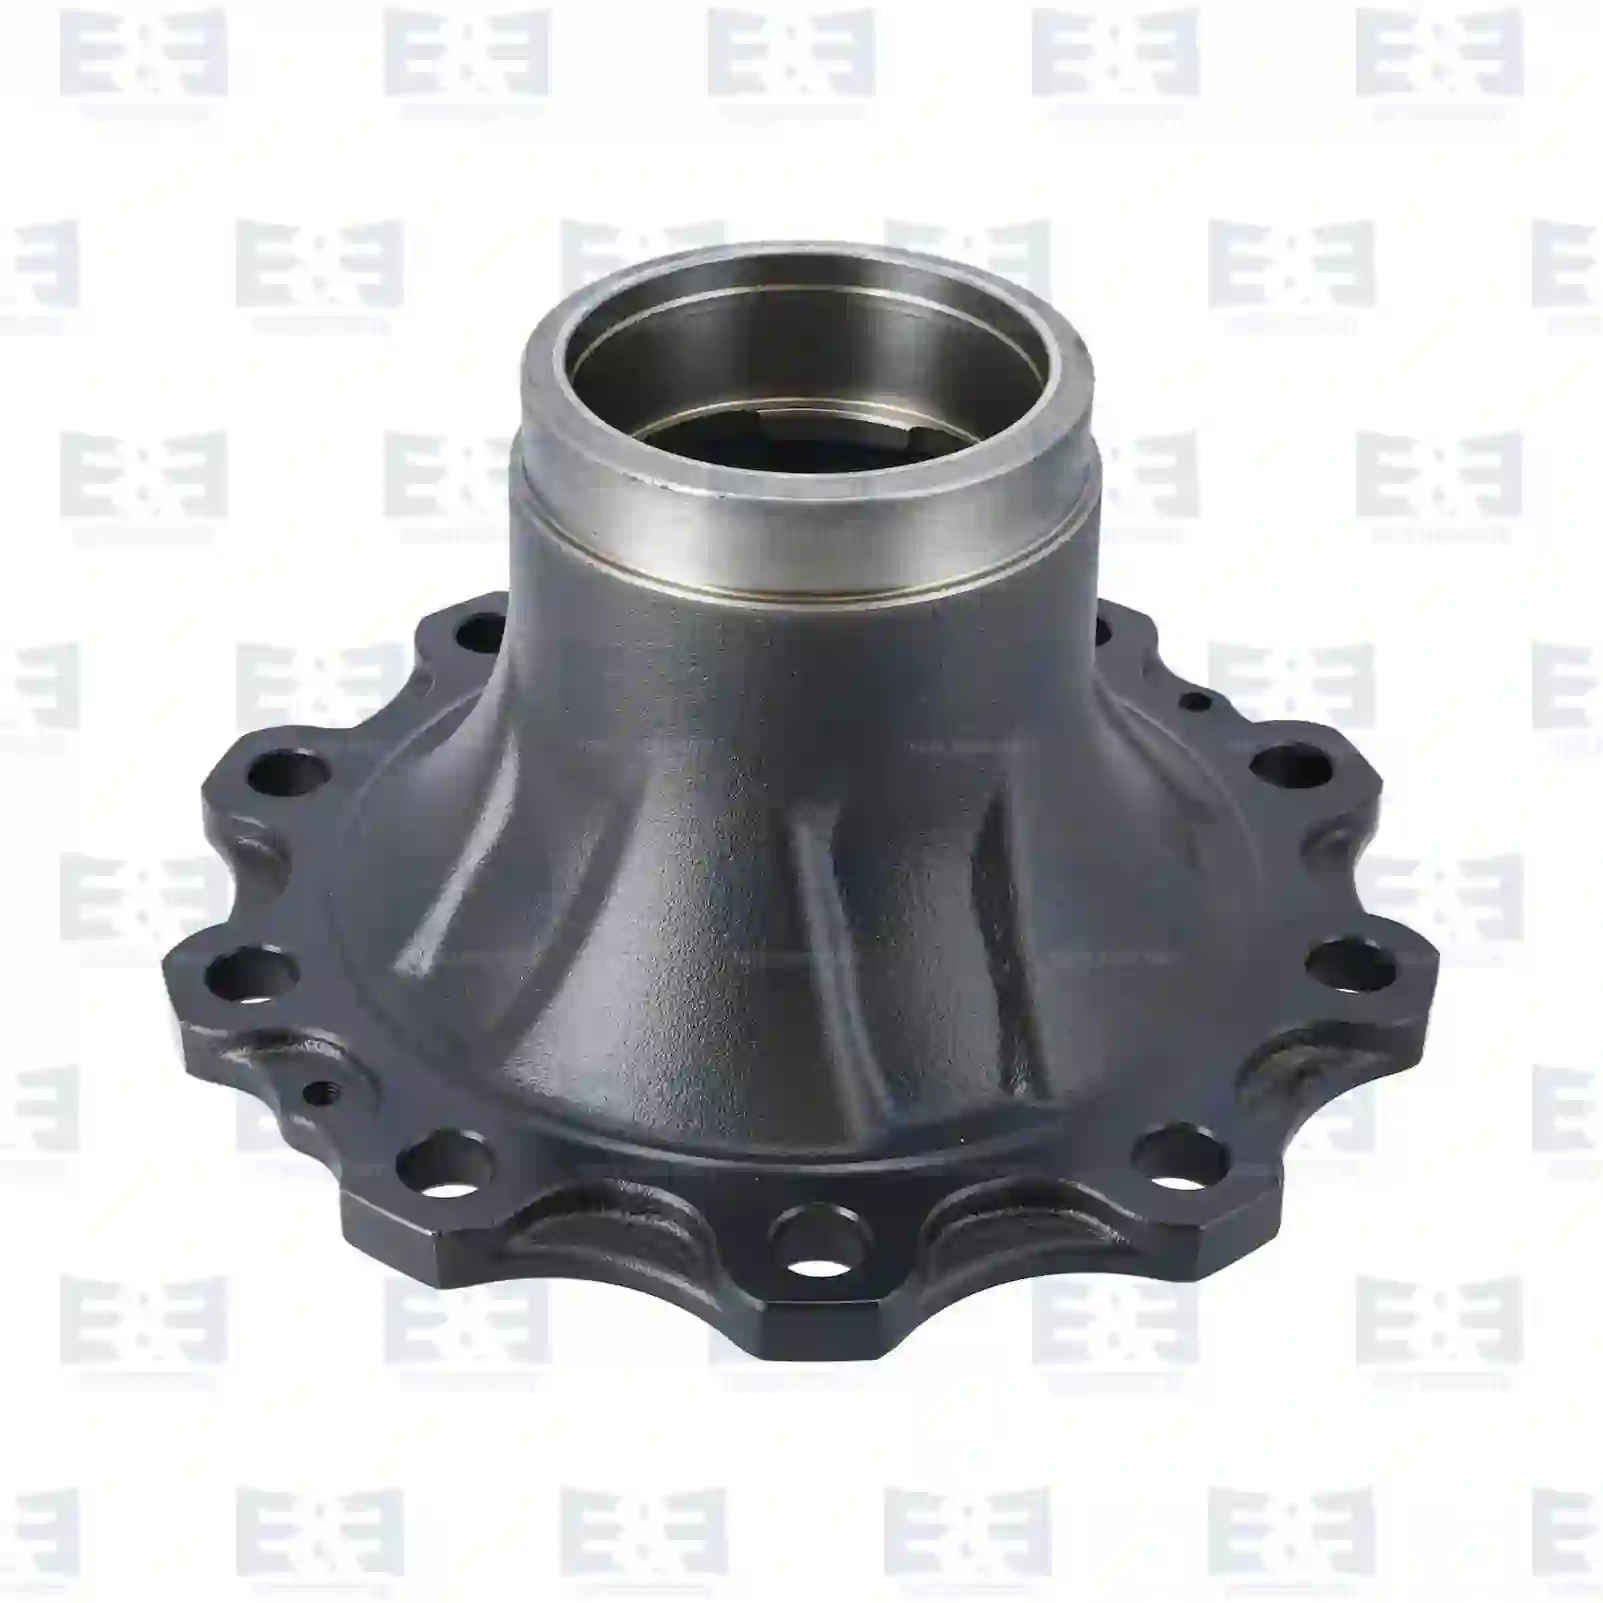  Wheel hub, without bearings, for drum brake || E&E Truck Spare Parts | Truck Spare Parts, Auotomotive Spare Parts